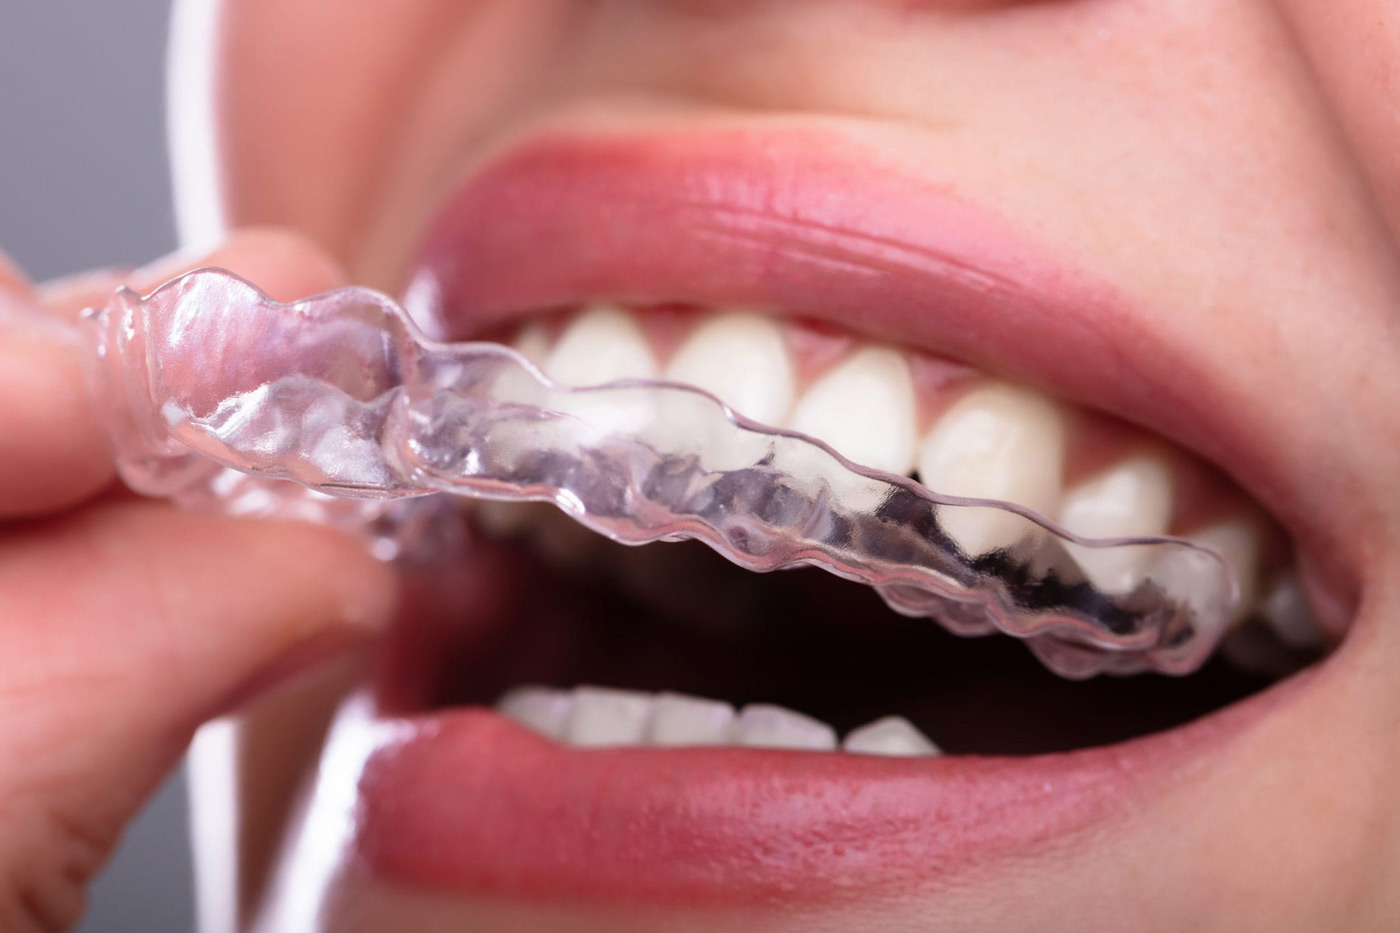 A close-up view of Candid clear dental aligners, showcasing their transparent and sleek design, poised to be placed over teeth.